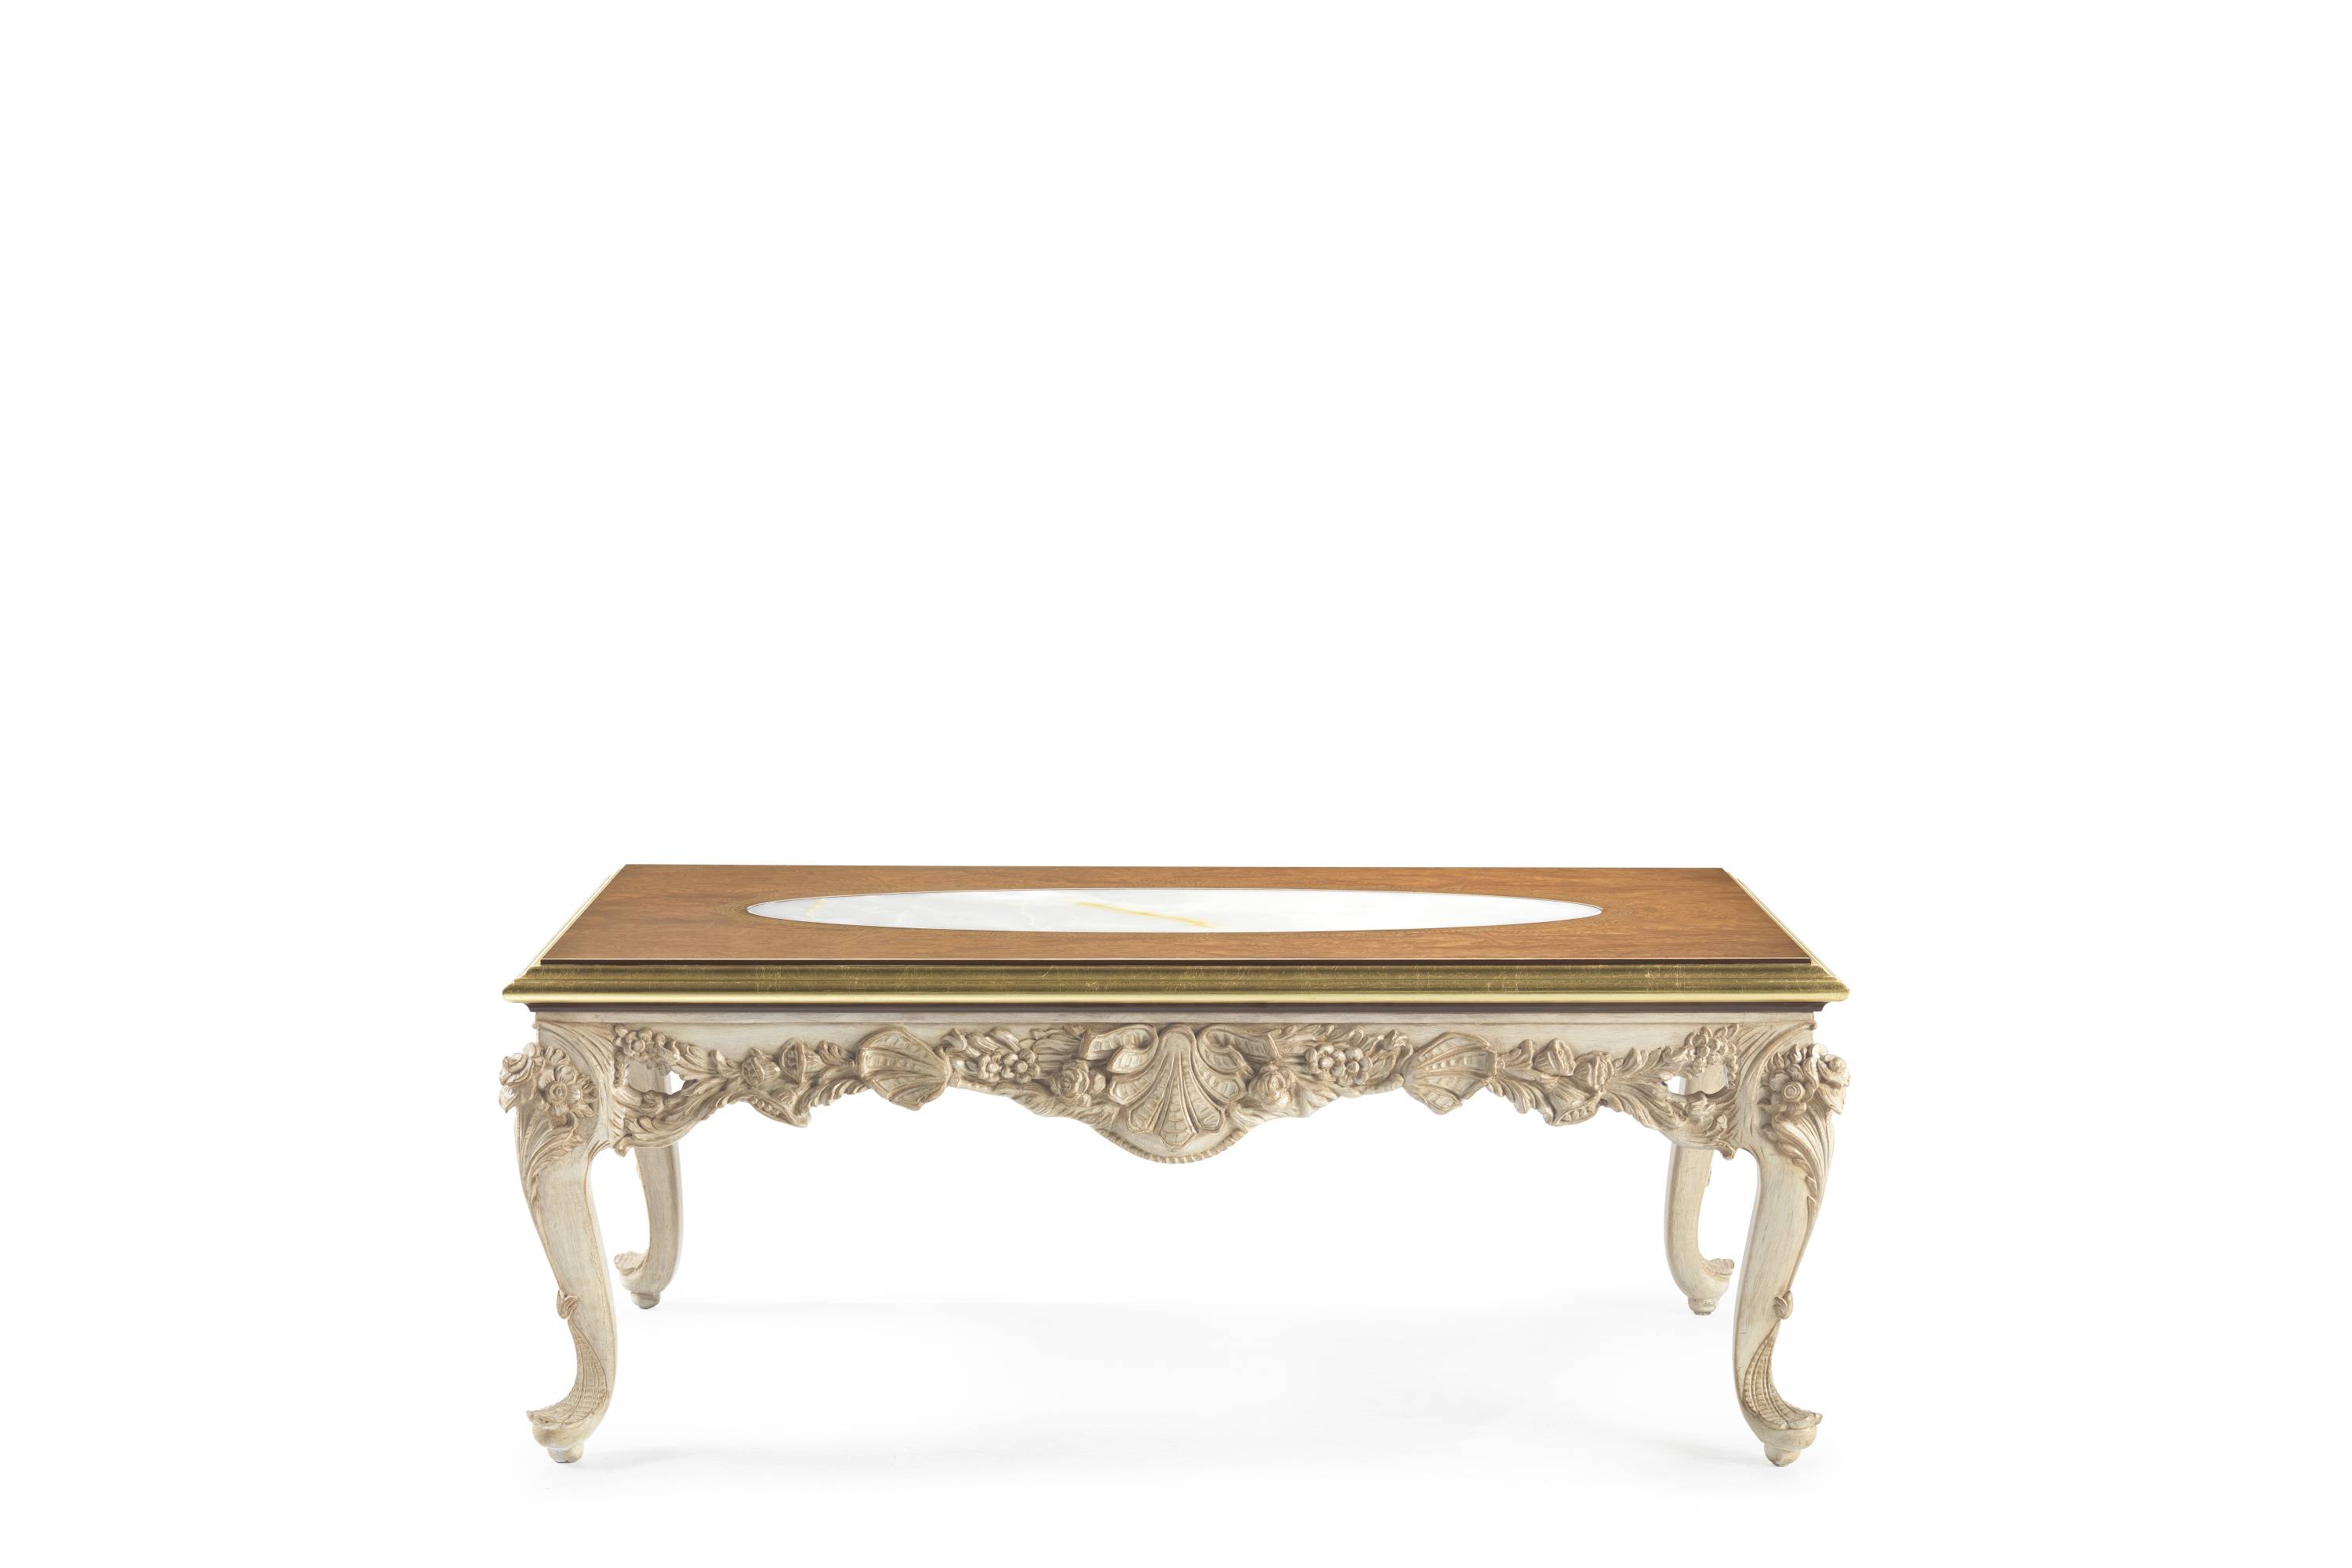 LA GRANDE DAME low table - Bespoke projects with luxury Made in Italy classic furniture